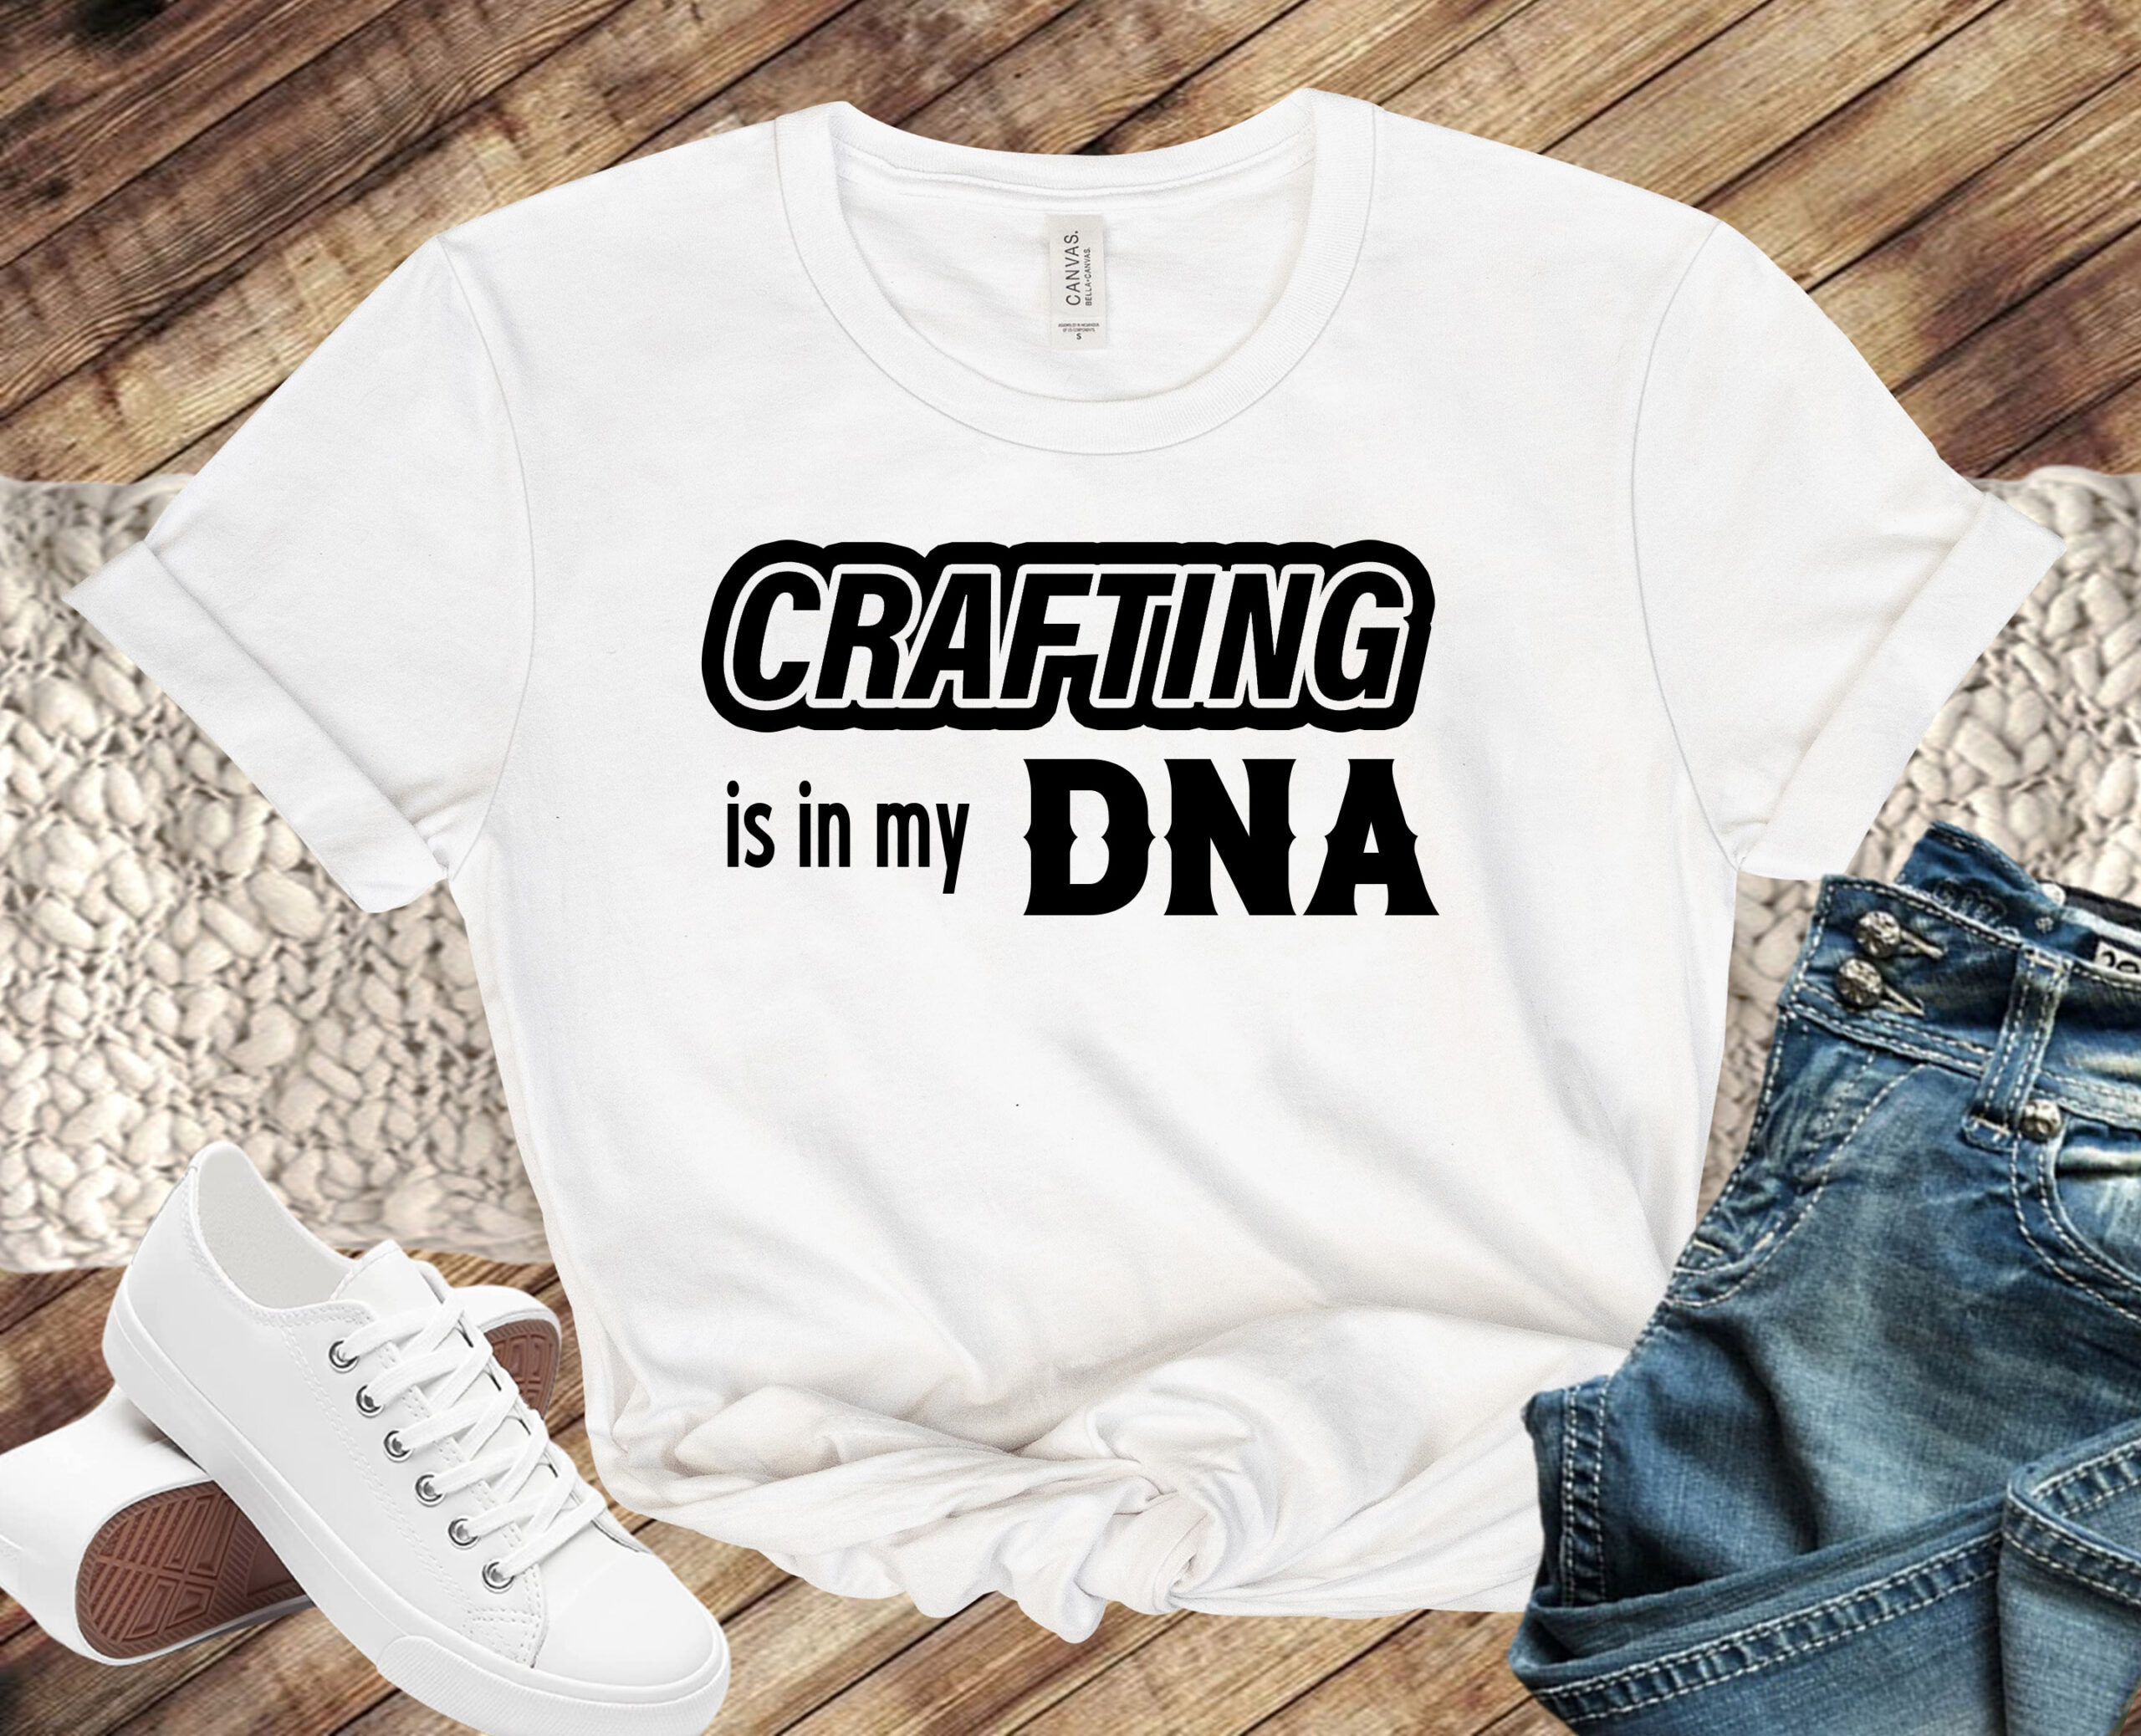 Free Crafting is in my DNA SVG File